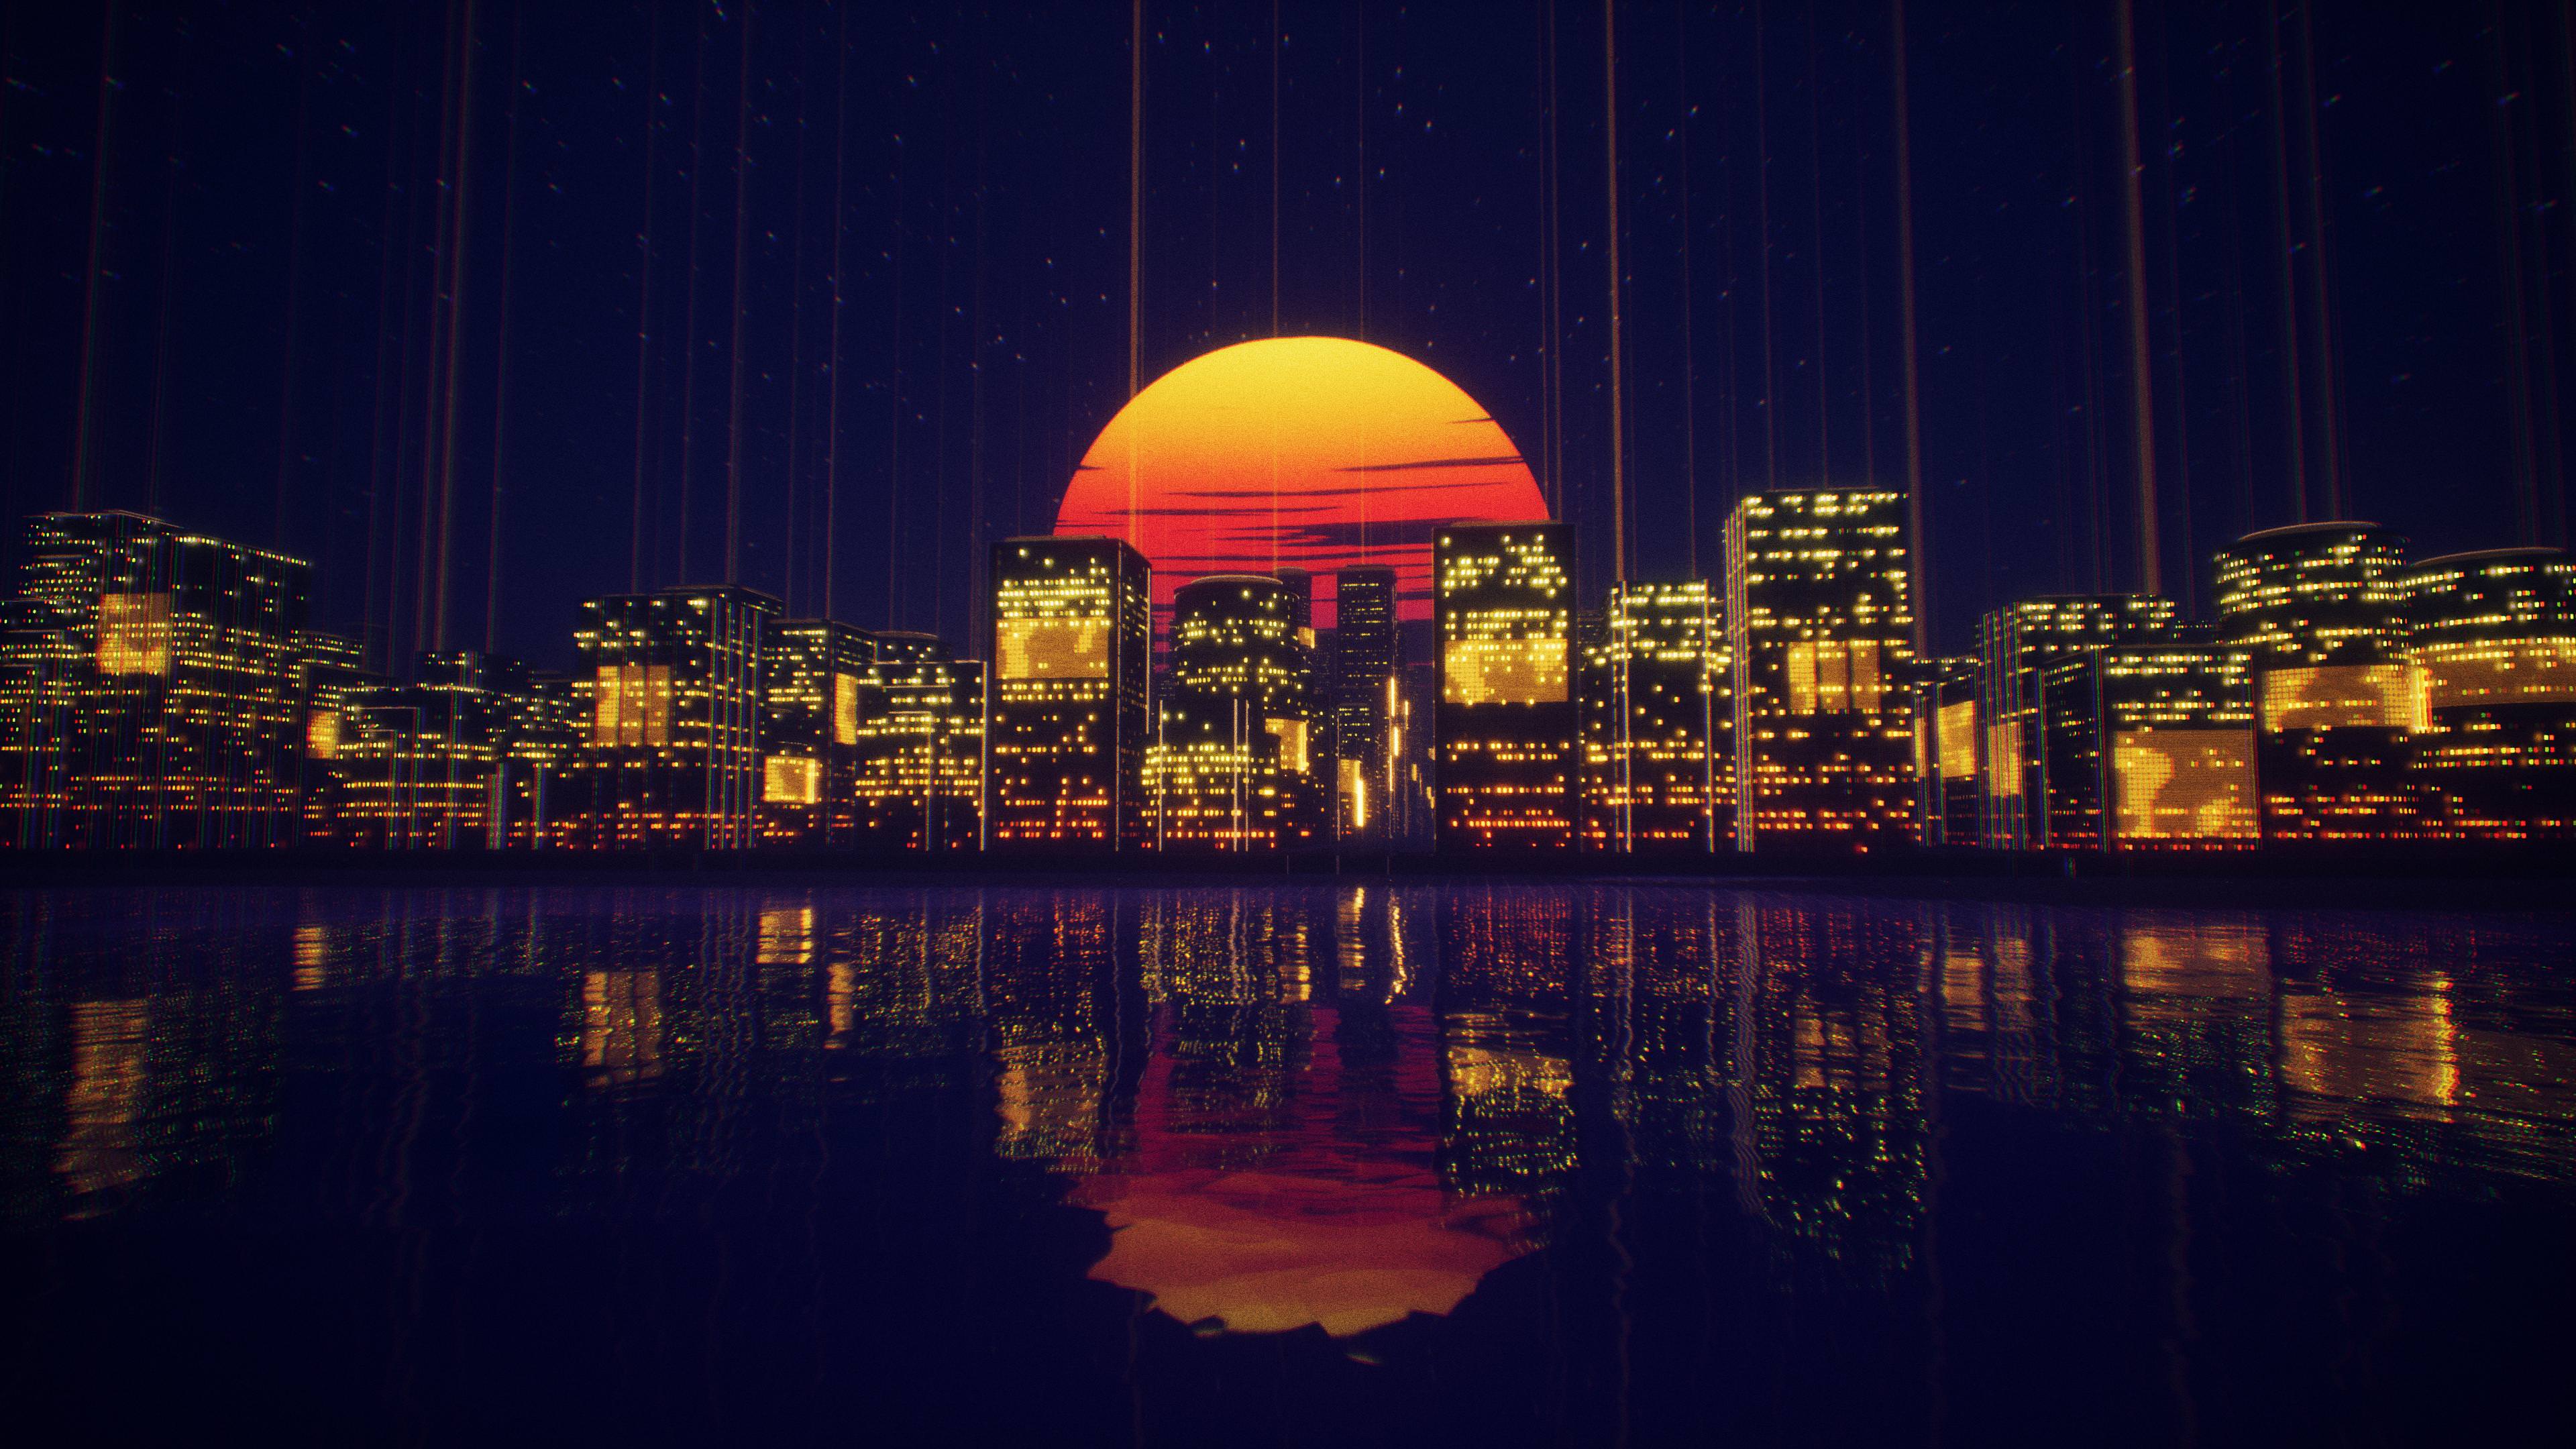 Wallpaper City Retro Sunset, Sunset, Water, Building, World, Background -  Download Free Image